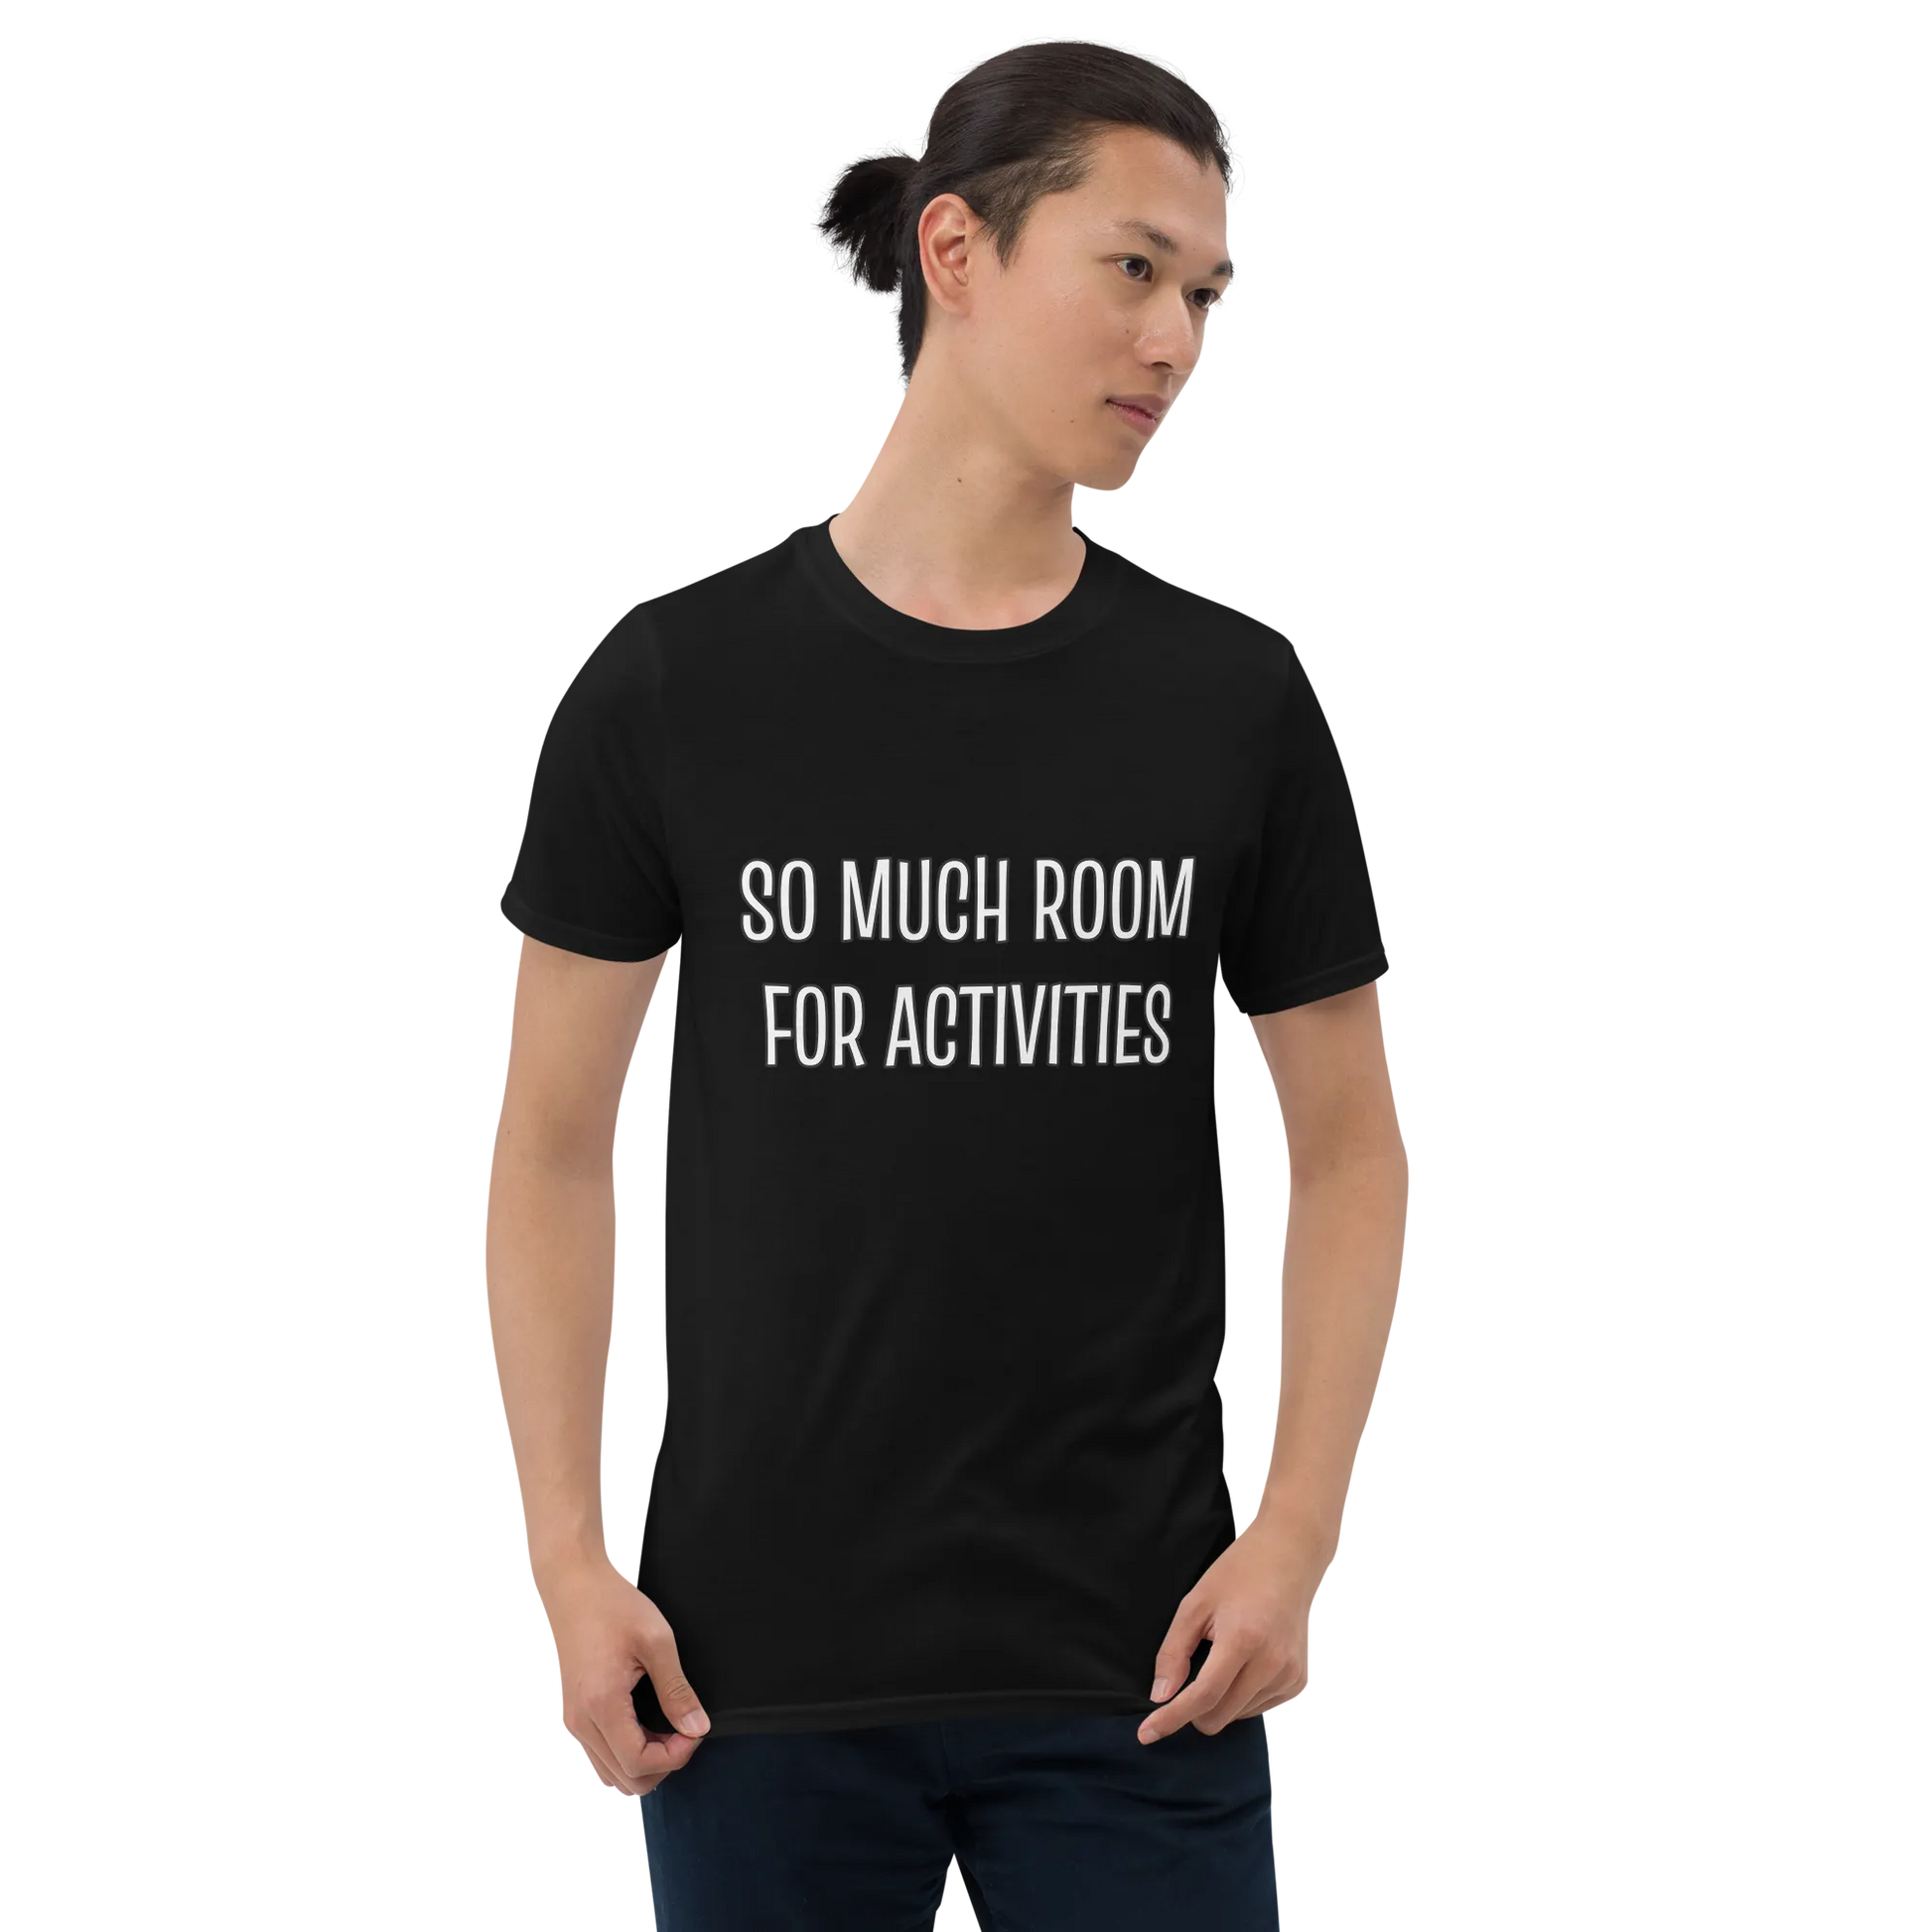 So Much Room For Activities Tee in Black on man